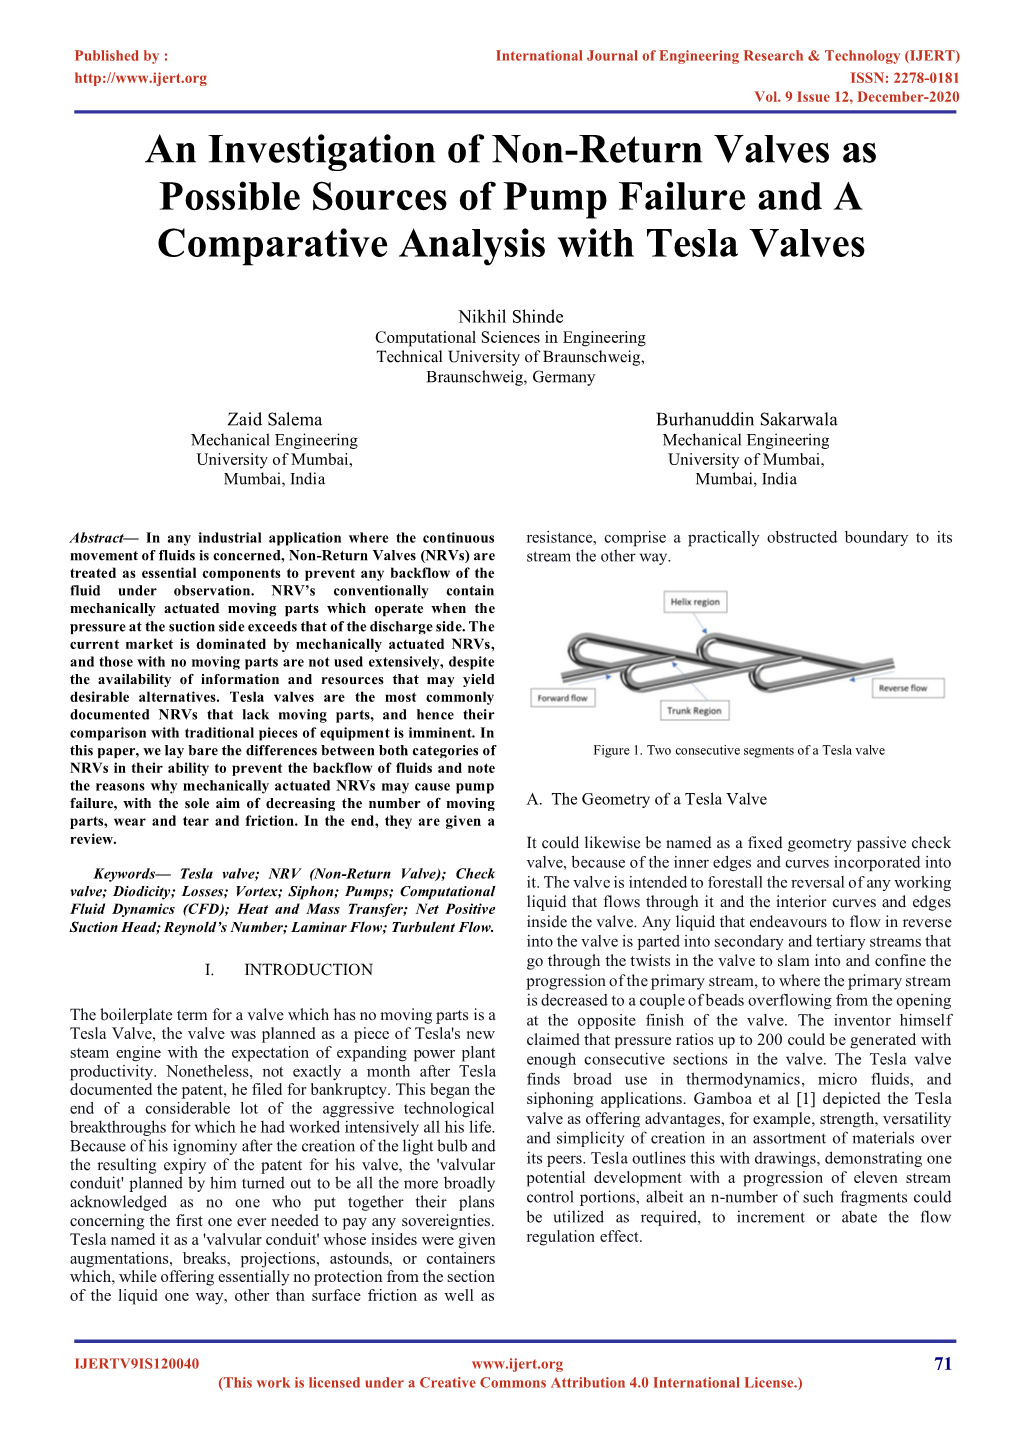 An Investigation of Non-Return Valves As Possible Sources of Pump Failure and a Comparative Analysis with Tesla Valves